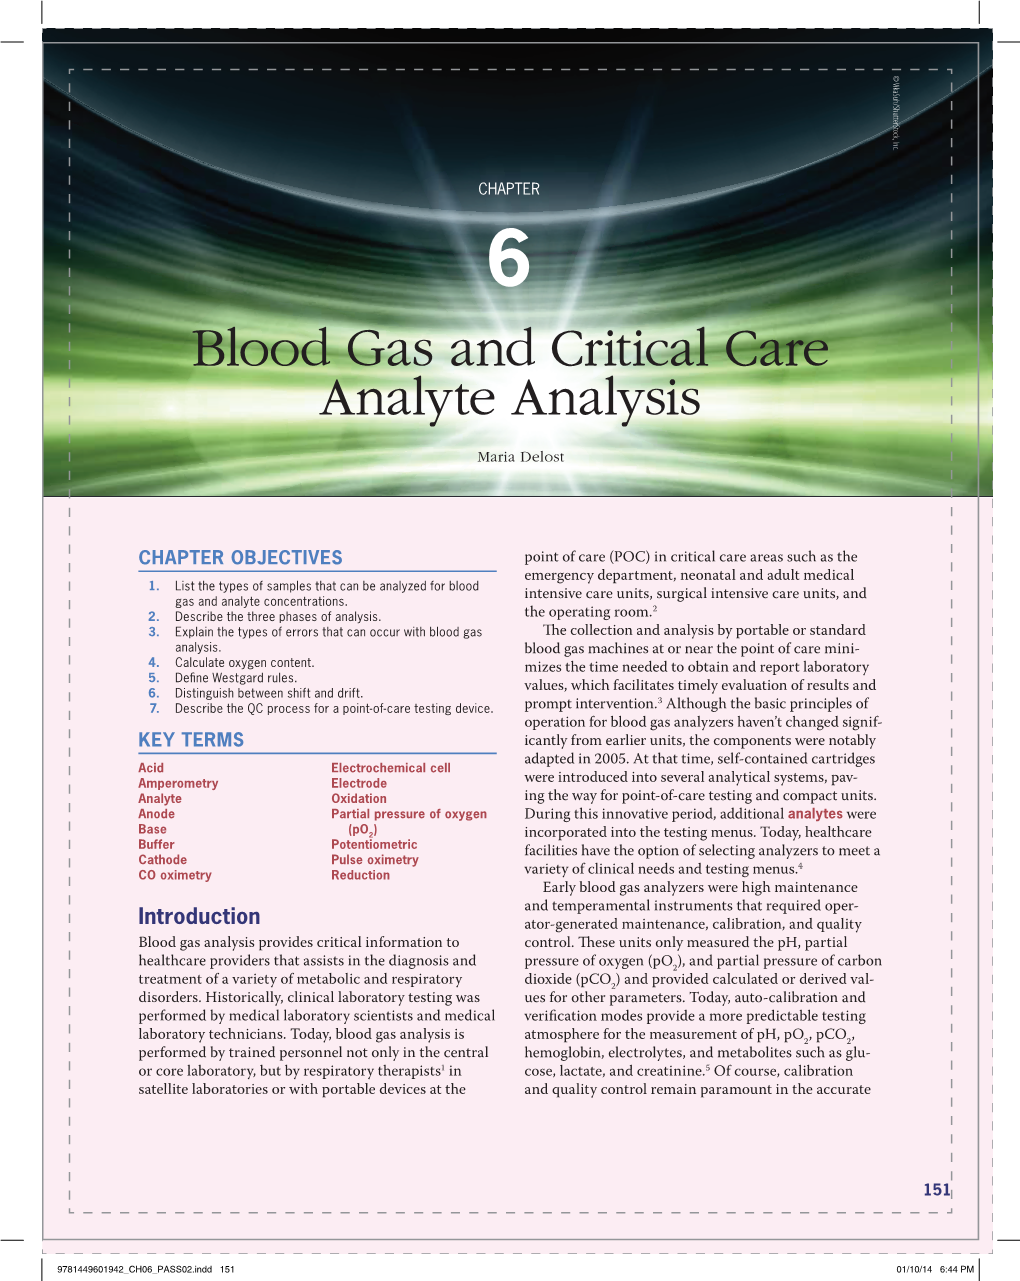 Blood Gas and Critical Care Analyte Analysis